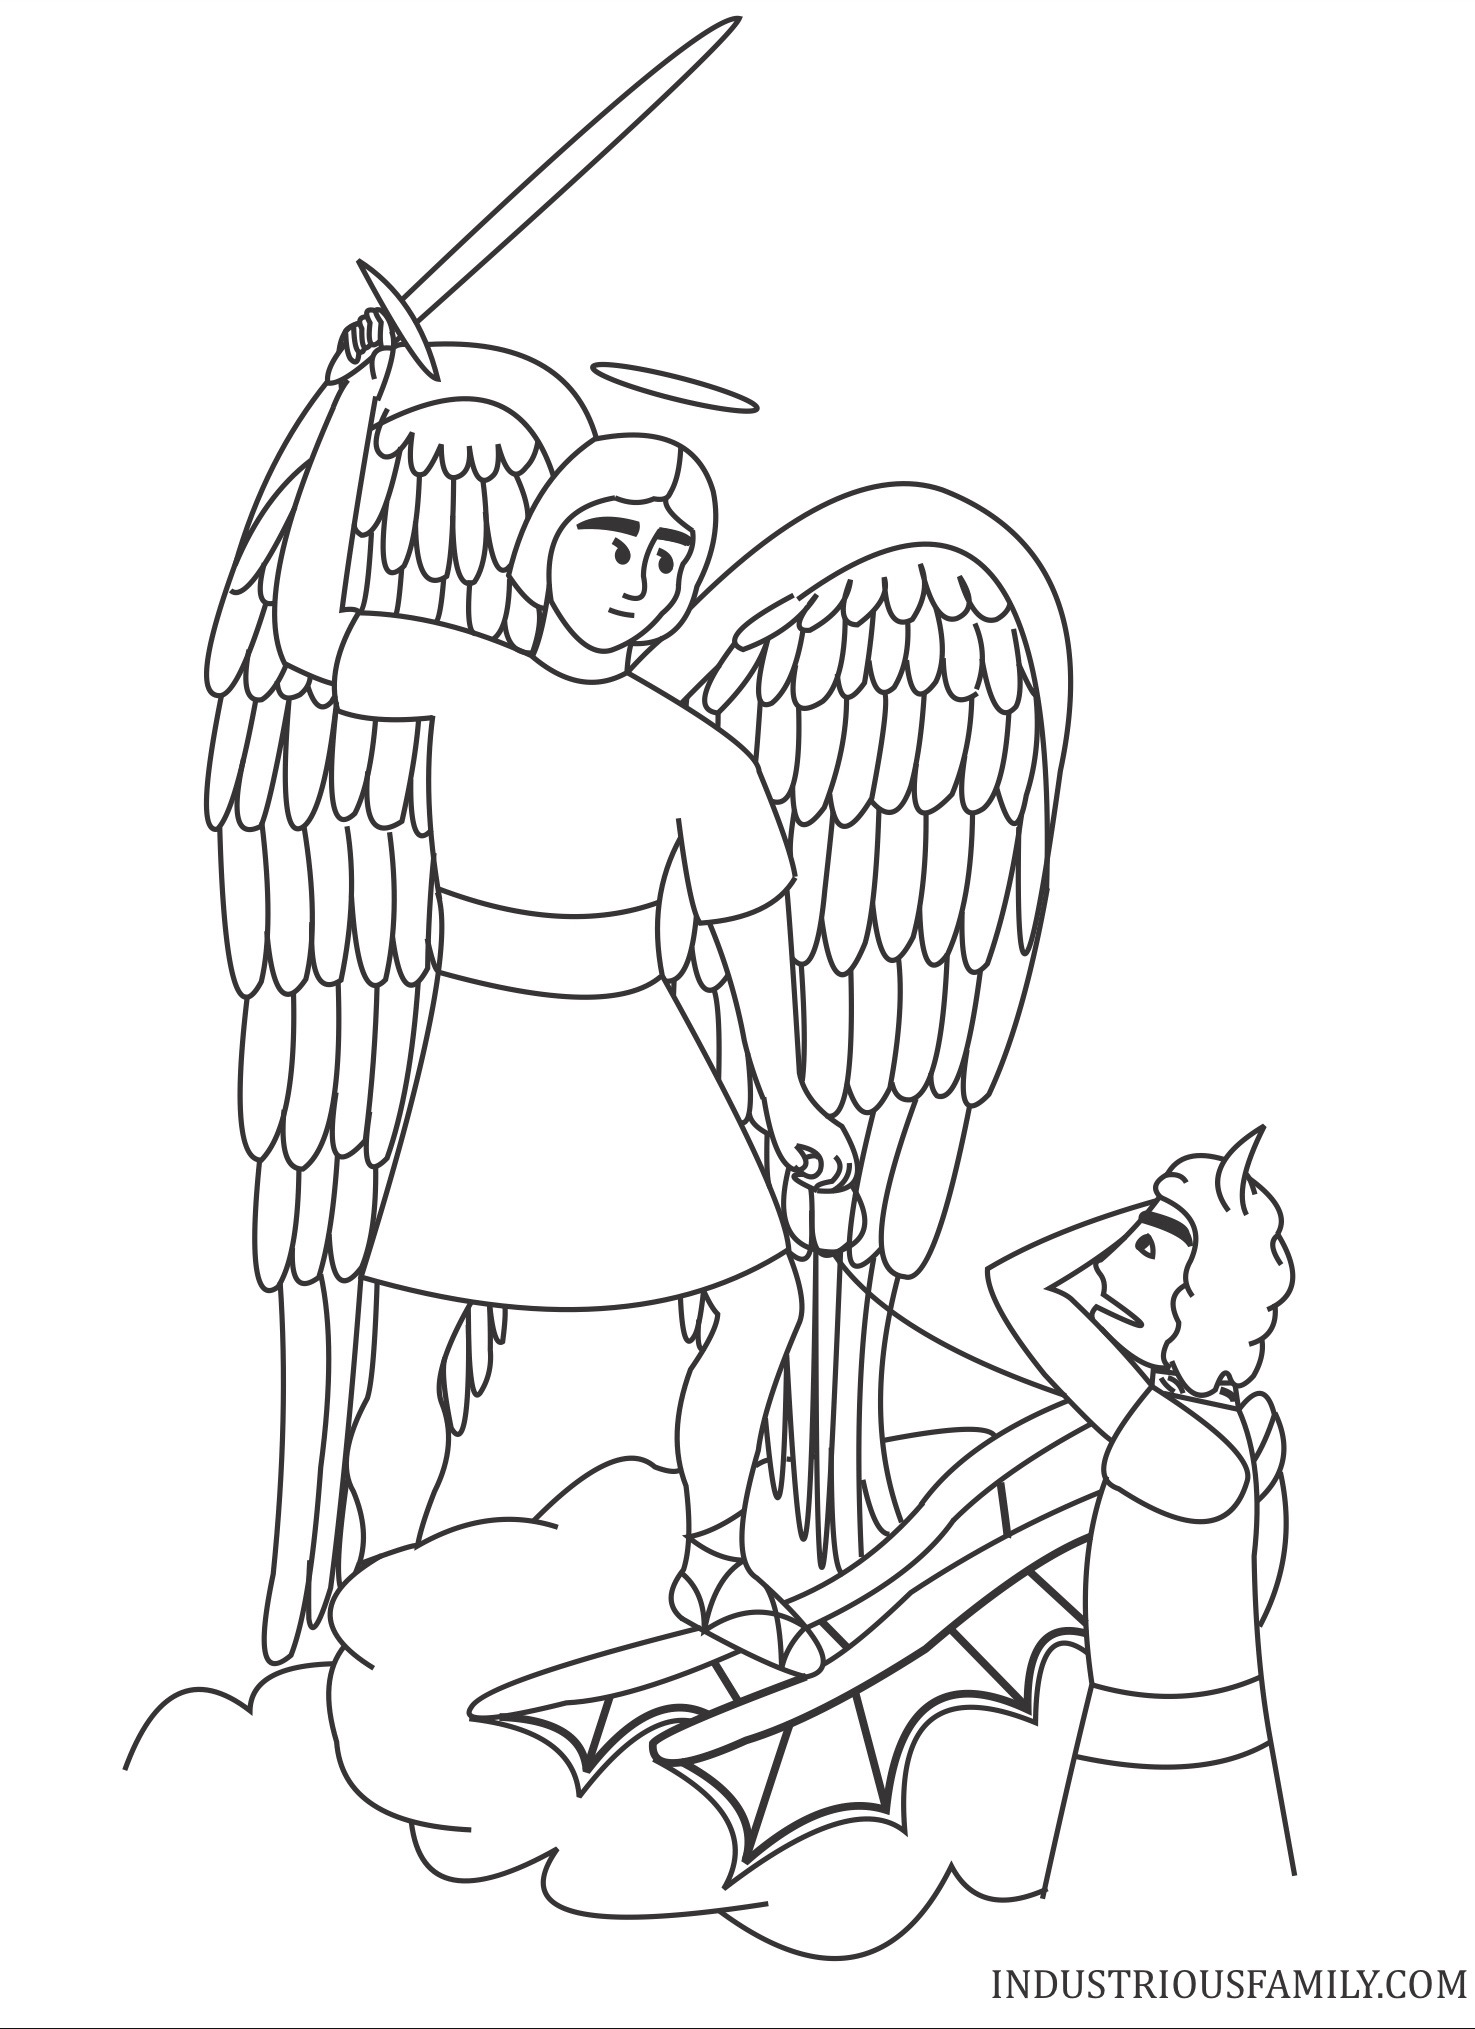 Free St Gabriel Coloring Page